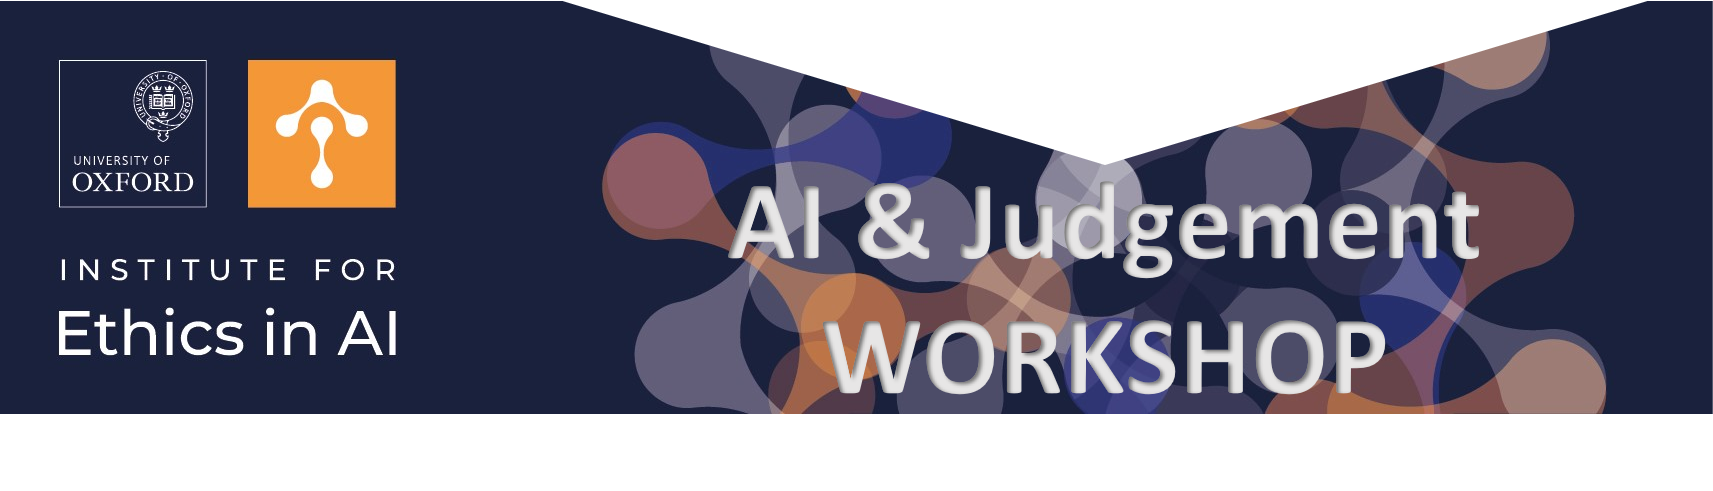 Ethics in AI logo on a dark background